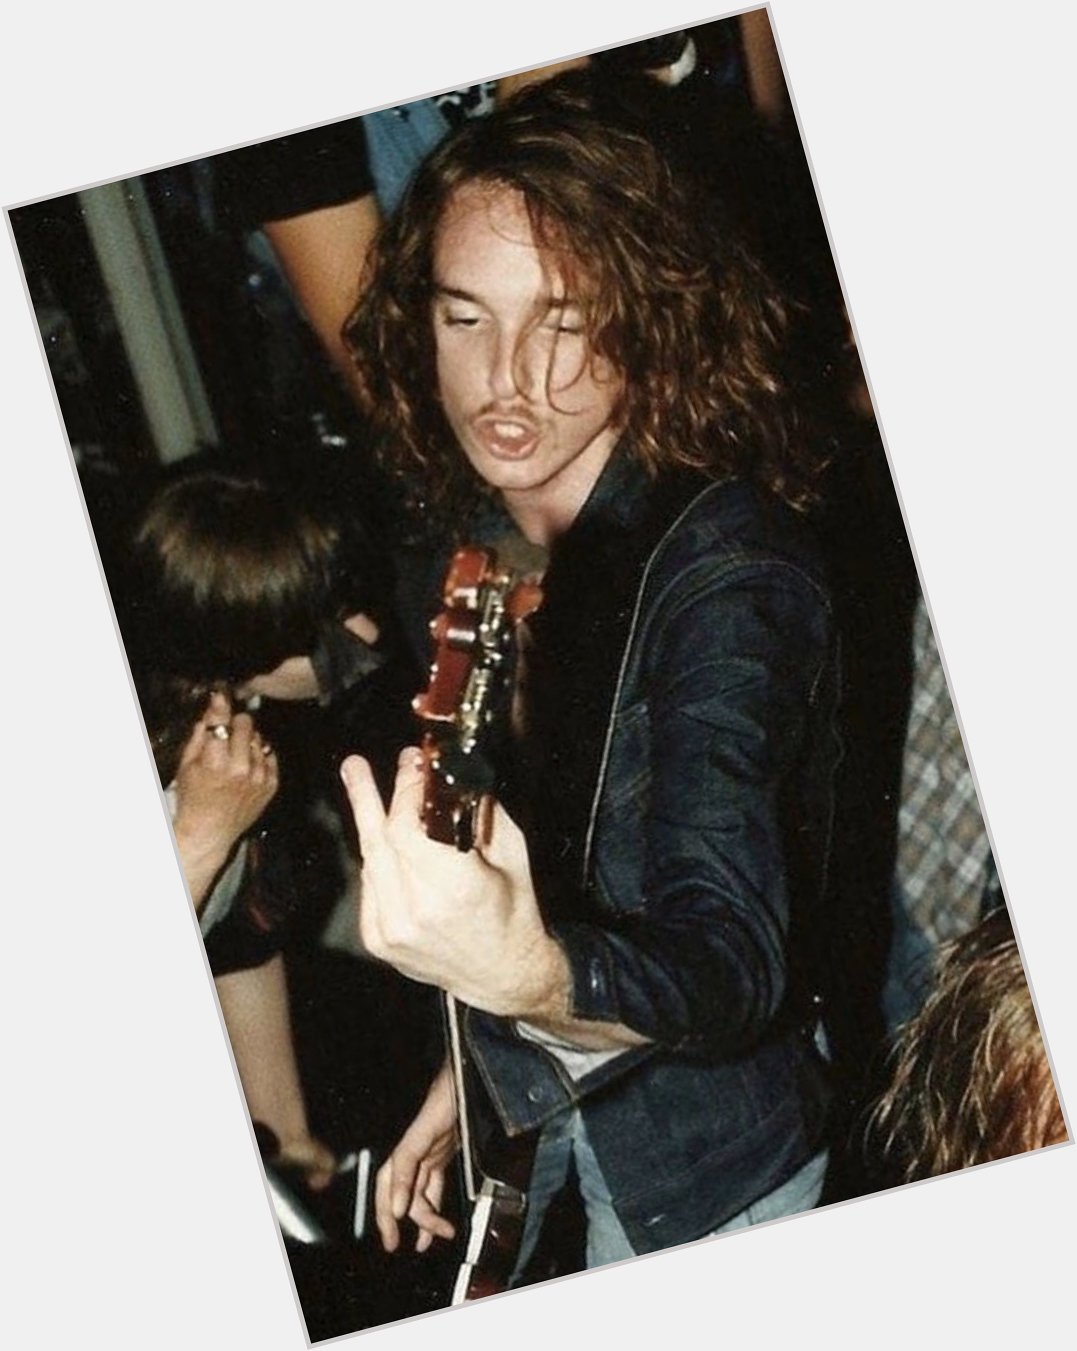 If Cliff Burton was still alive now he d be such a fucking babe. Happy birthday Cliff   